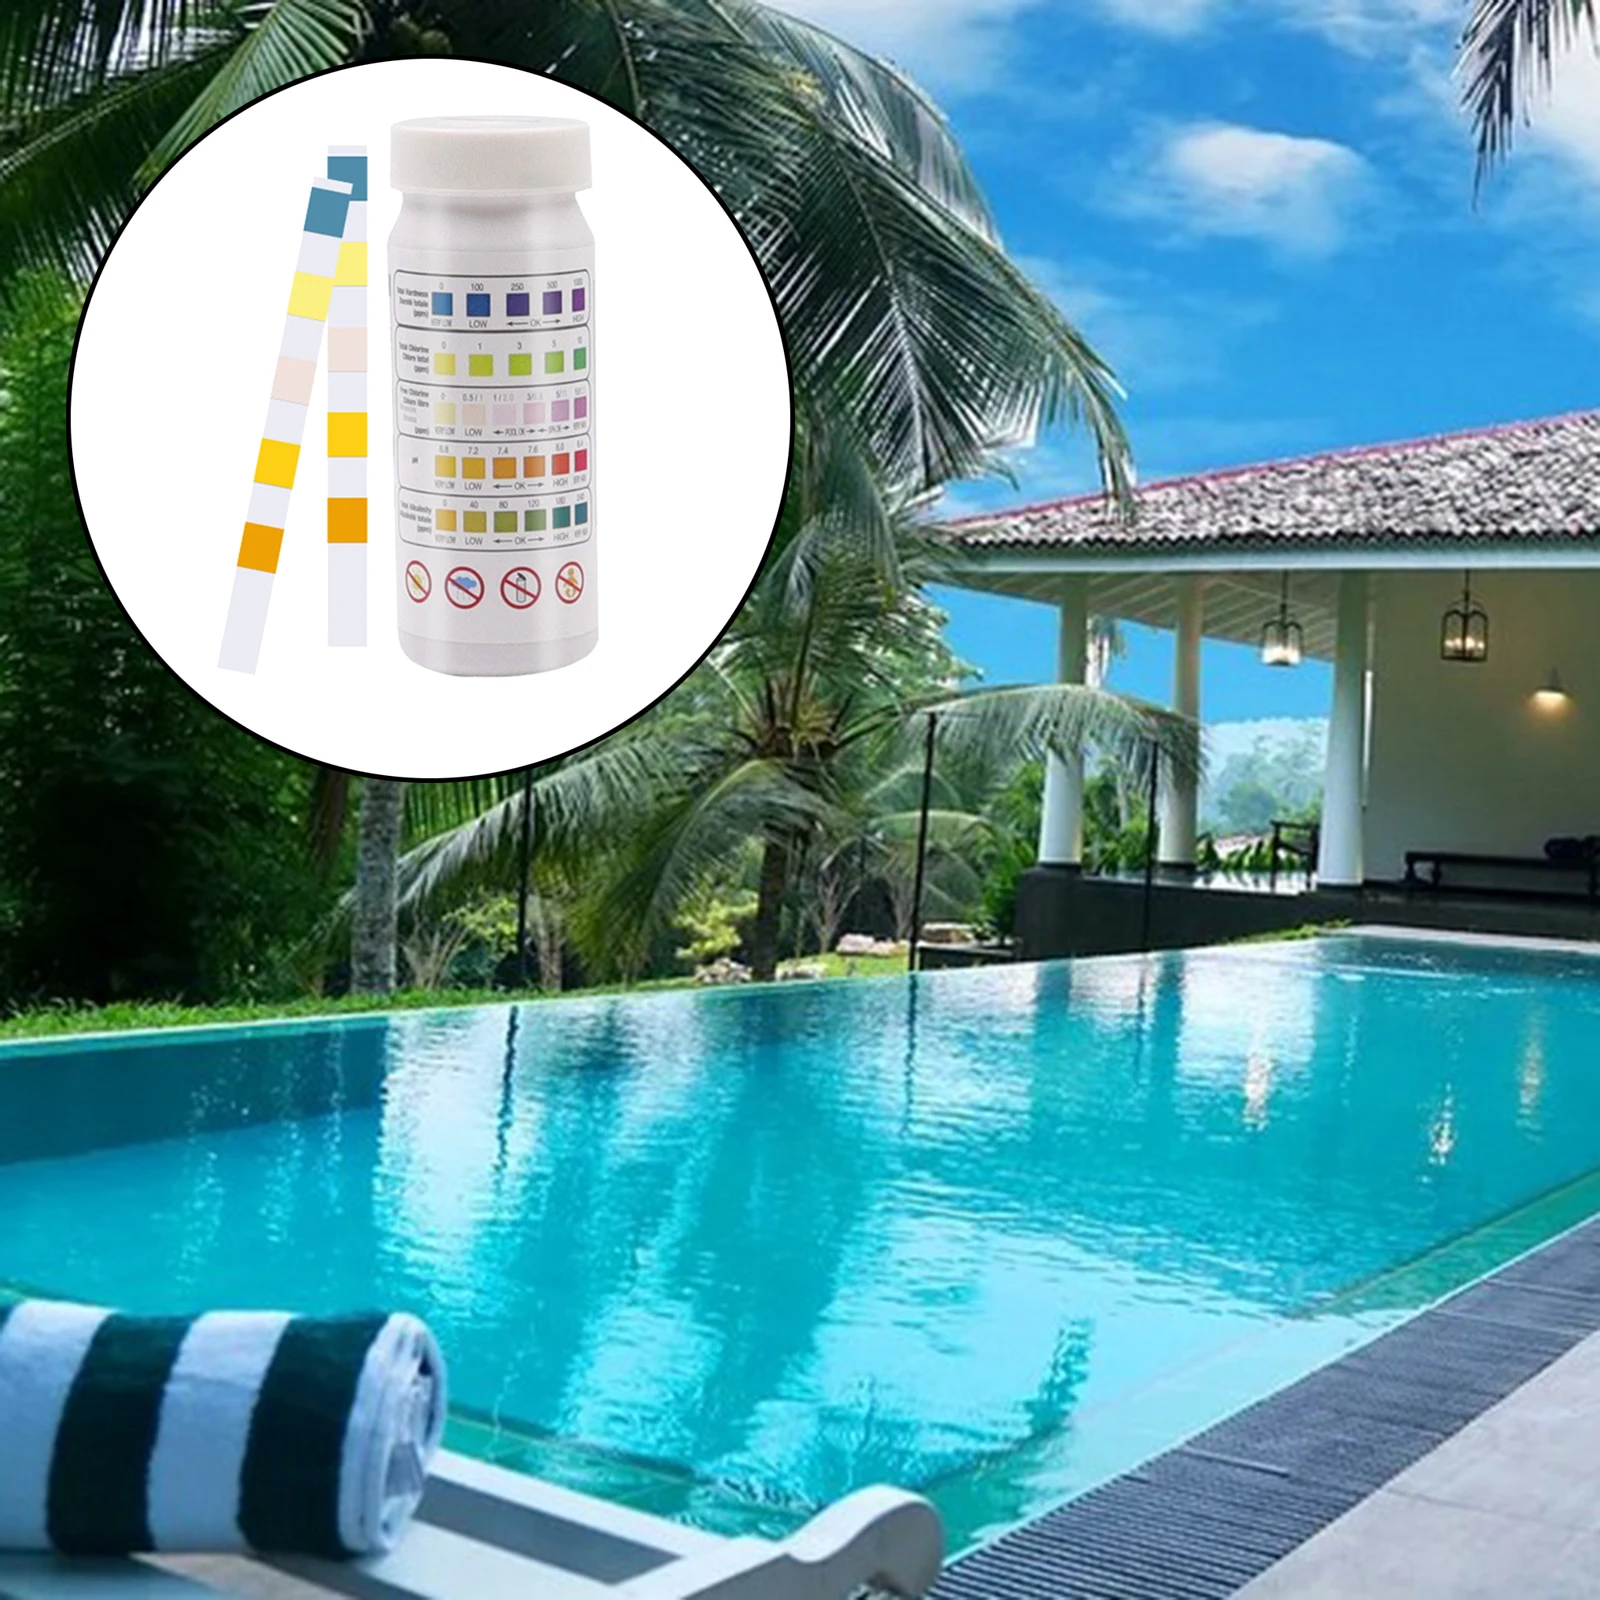 1 Bottle Hot Tub Pool Water Quality 4-in-1 Test Strip Residual Chlorine PH Value Alkalinity Hardness